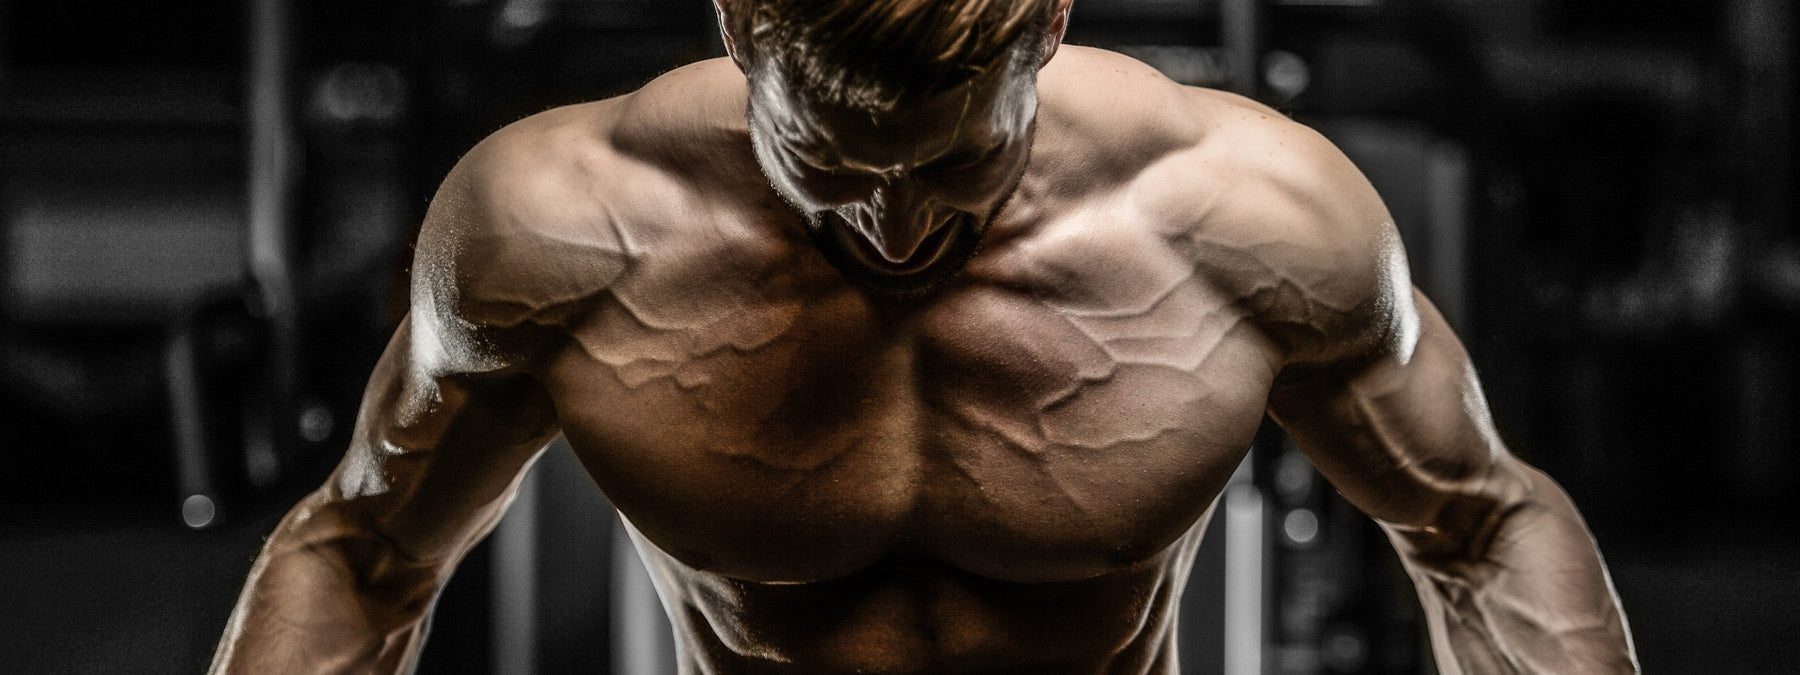 3 Ugly Truths About Building a Big Chest